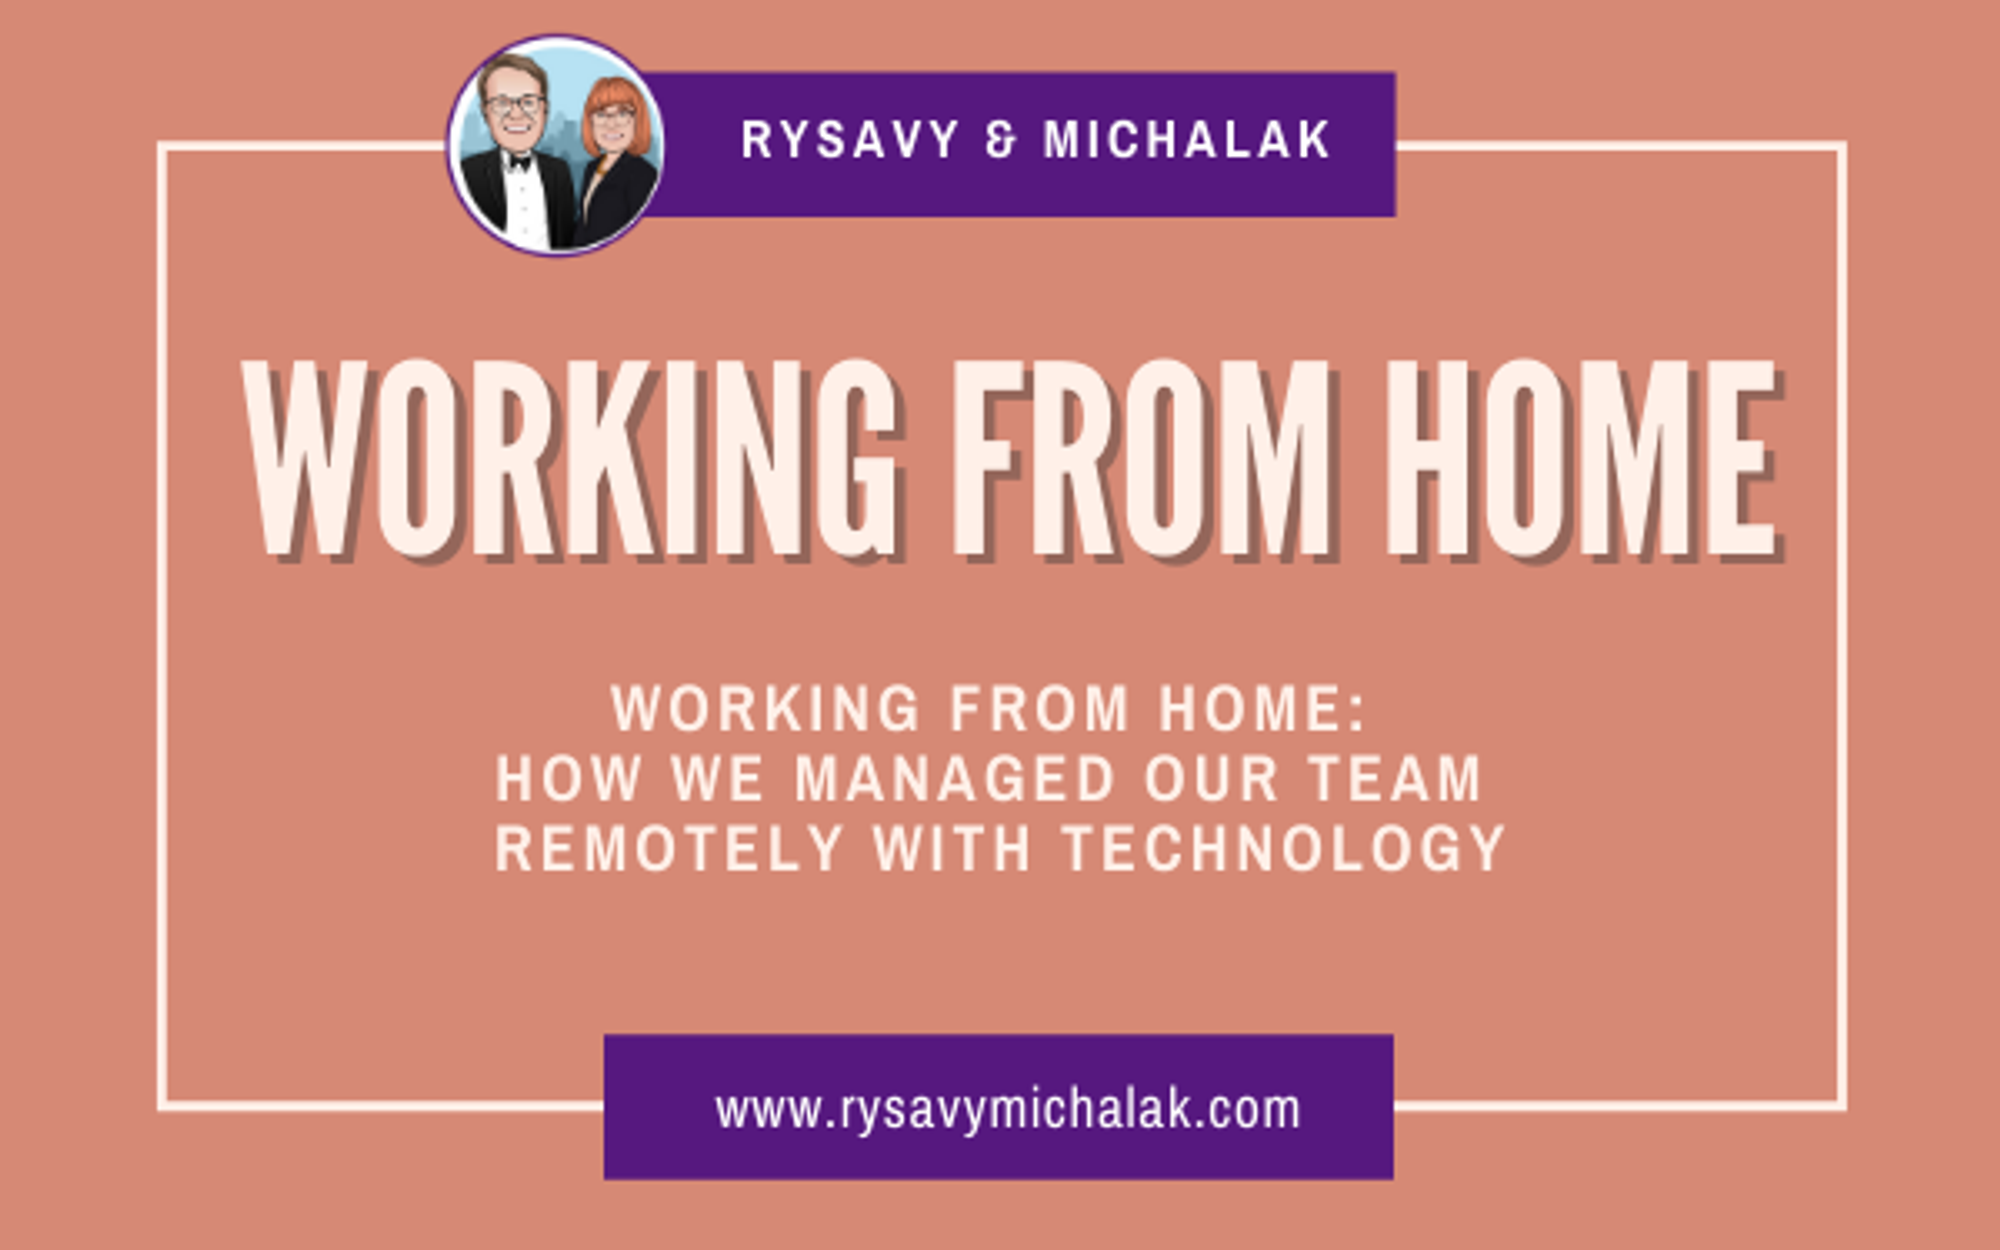 Working from Home: How We Managed Our Team Remotely with Technology